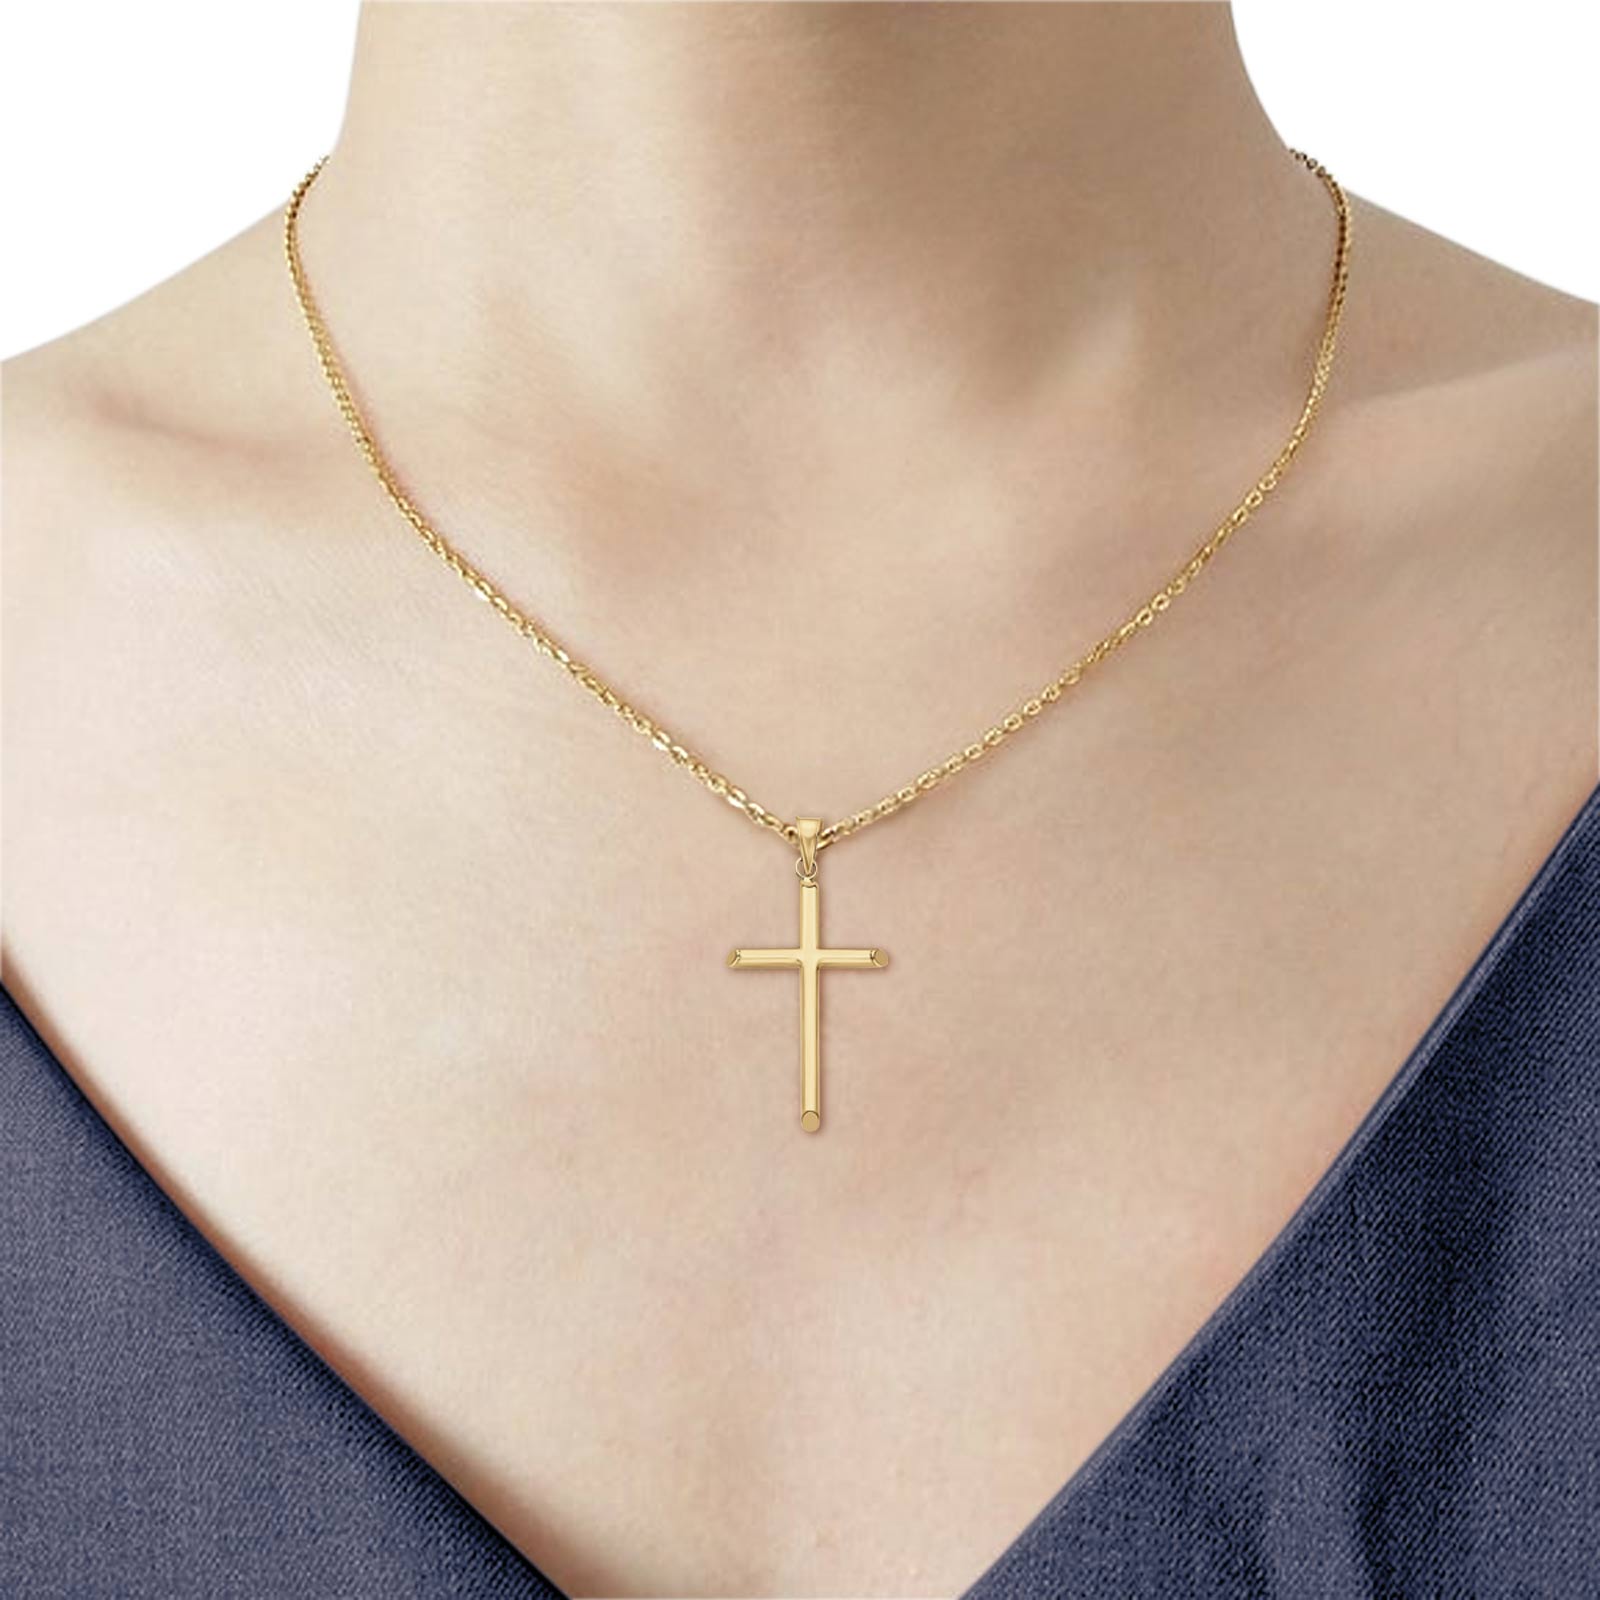 14K Yellow Gold Real Classic Cross Religious Charm Pendant 1.2gm